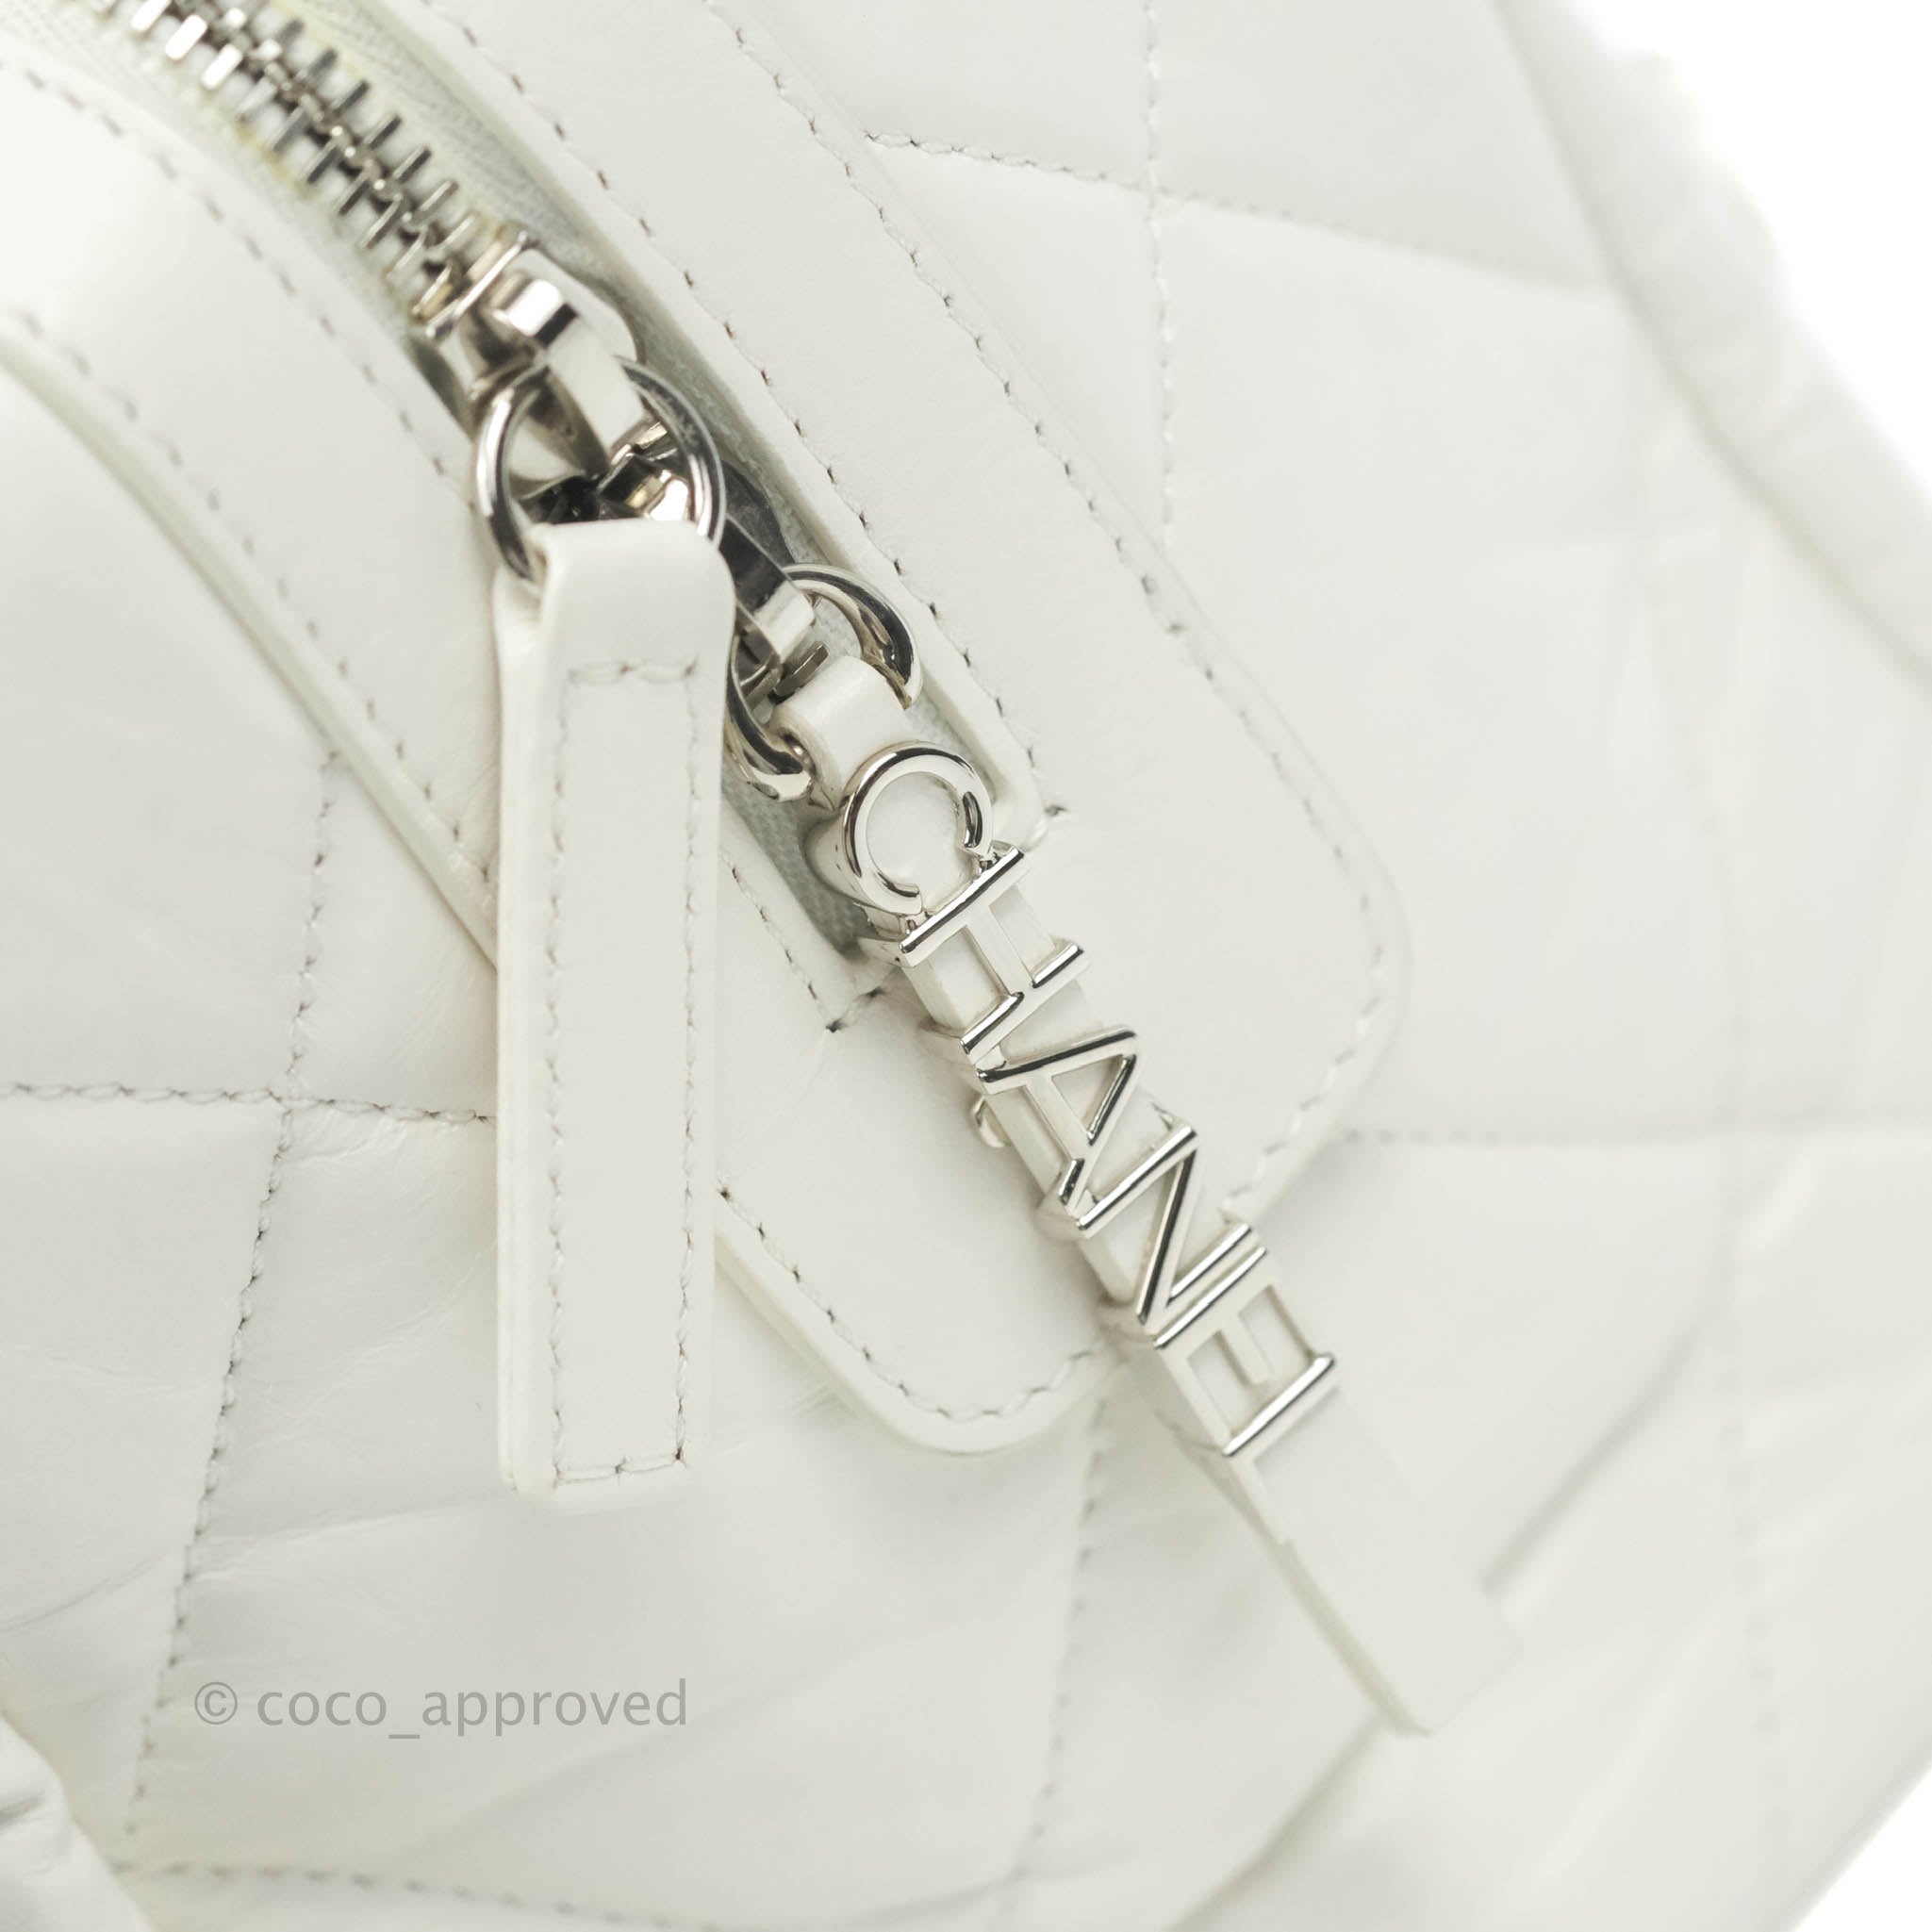 Chanel Calfskin Small Bowling Bag White Silver Hardware – Coco Approved  Studio